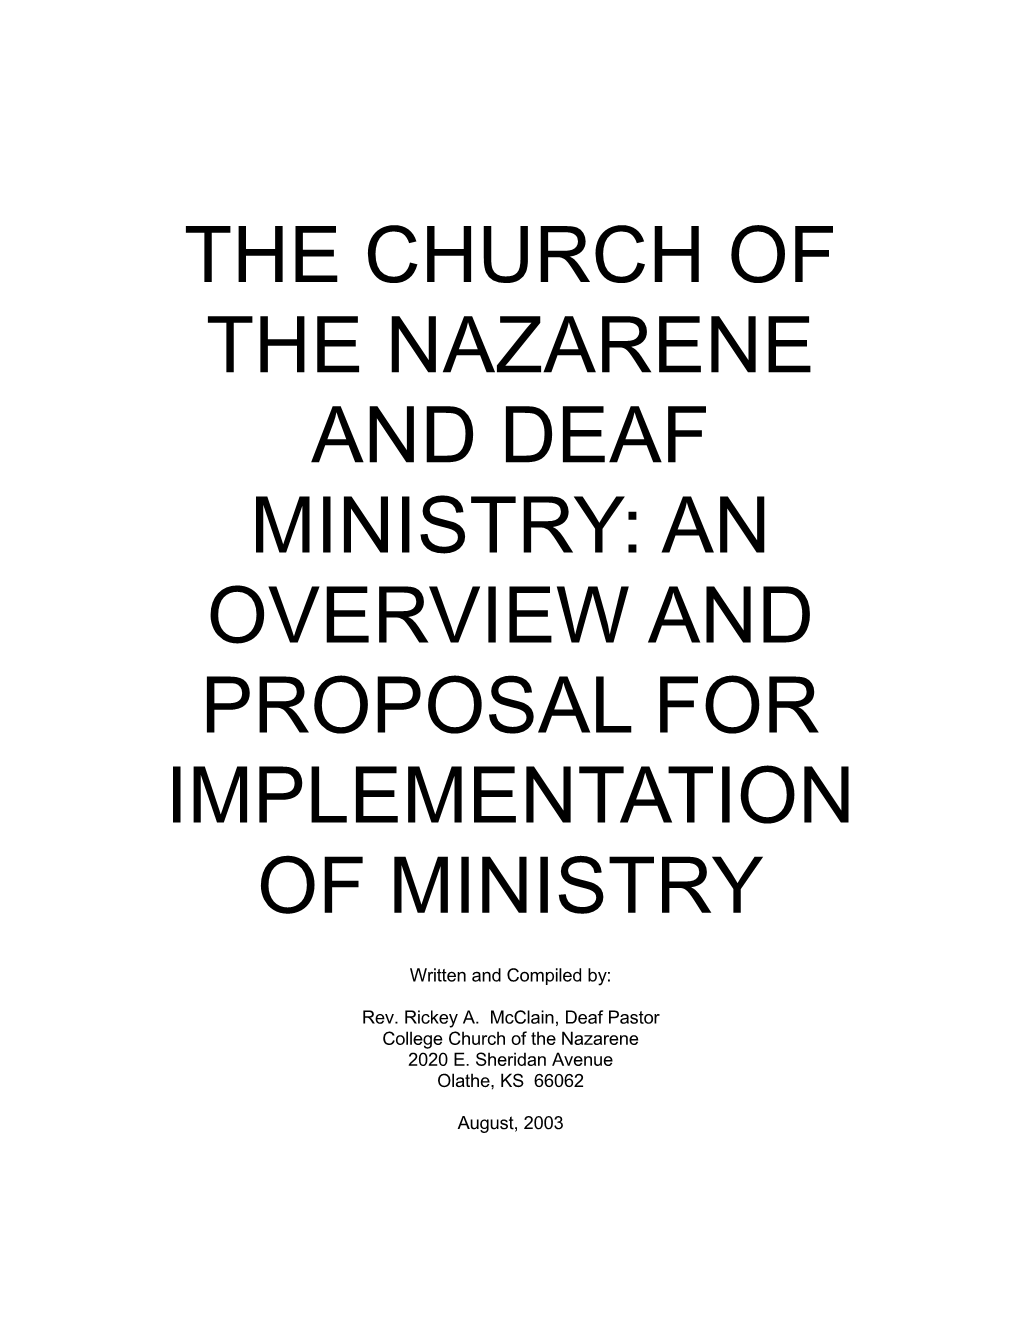 The Church of the Nazarene and Deaf Ministry: an Overview and Proposal for Implementation